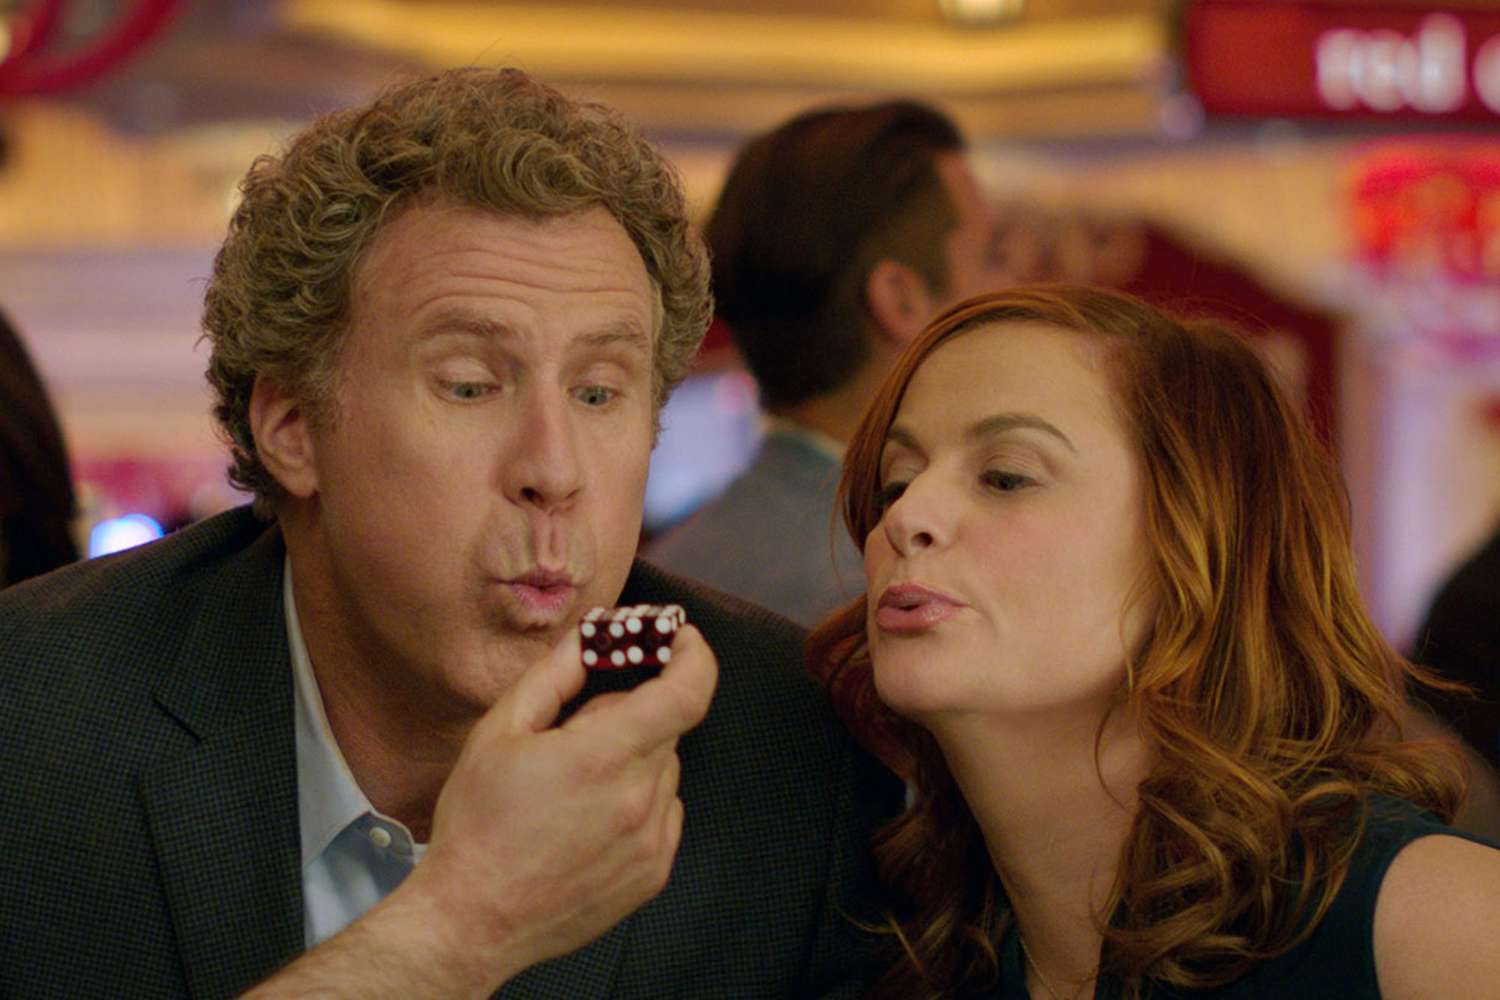 5. Will Ferrell and Amy Poehler in The House (2017)